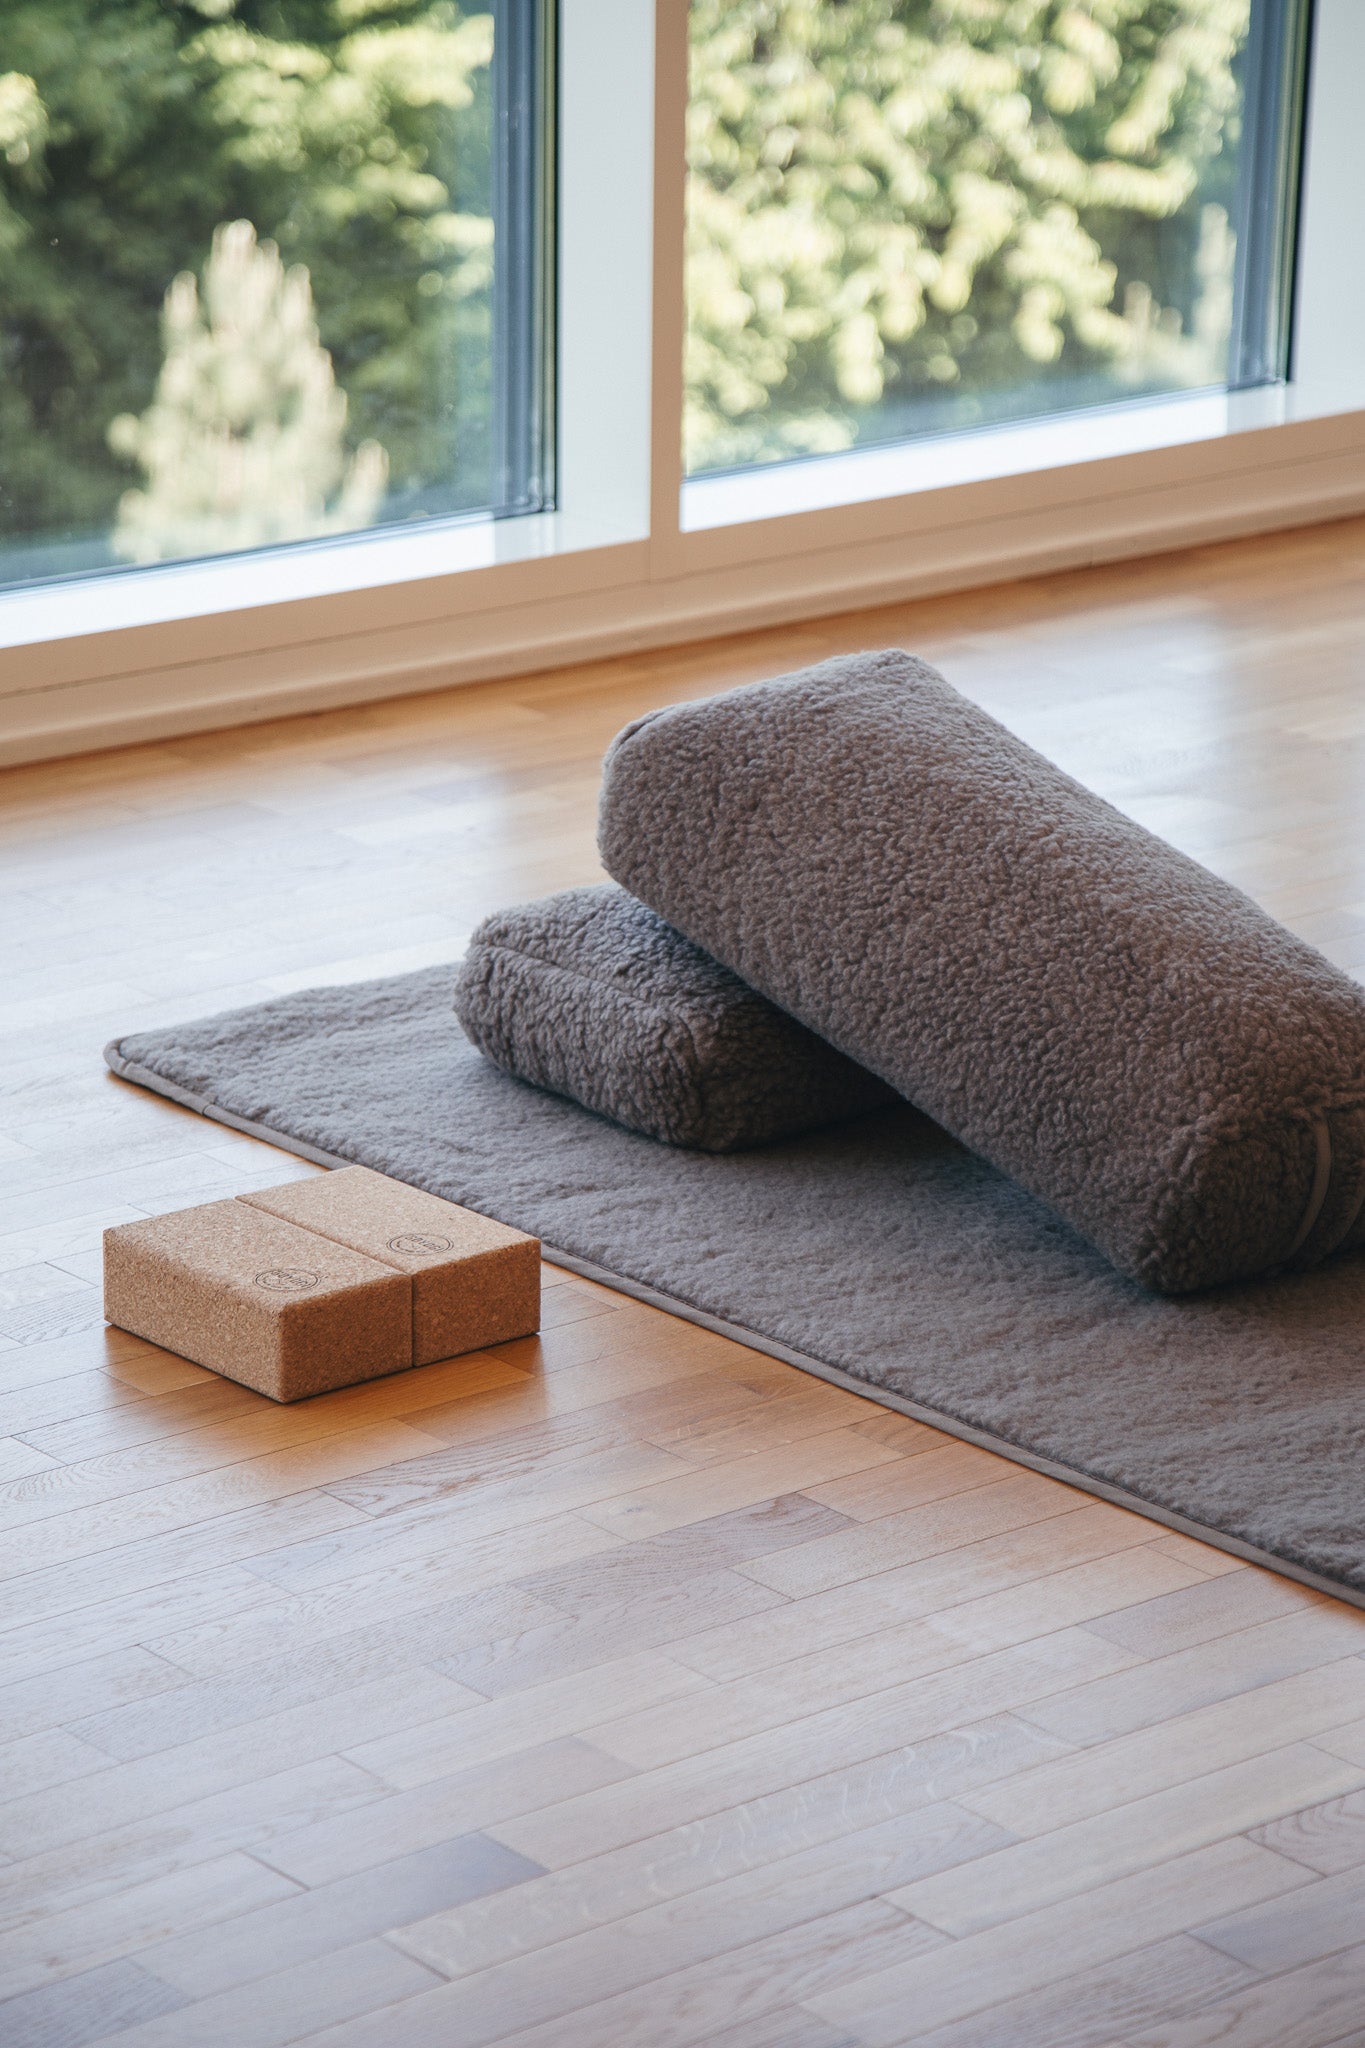 Wool yoga mat with coconut